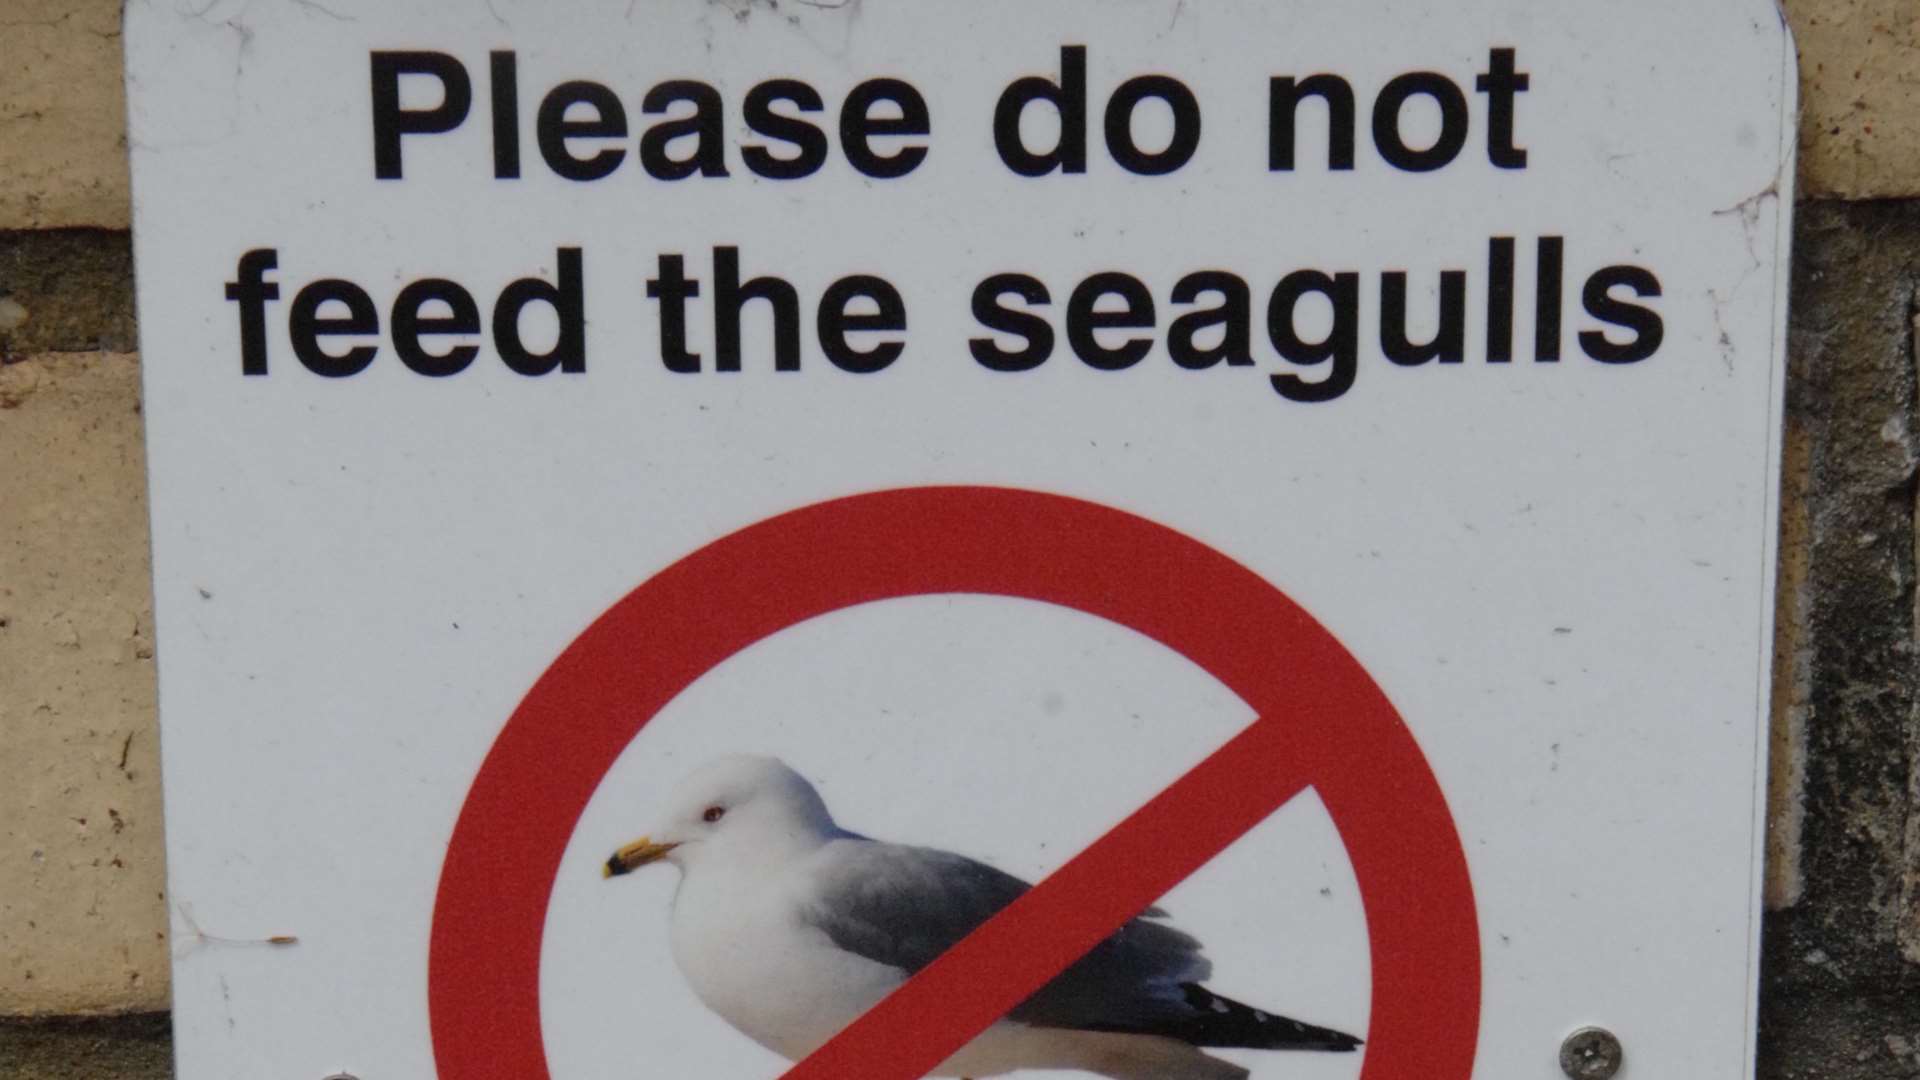 Councillors have previously discussed what to do about the seagull problem